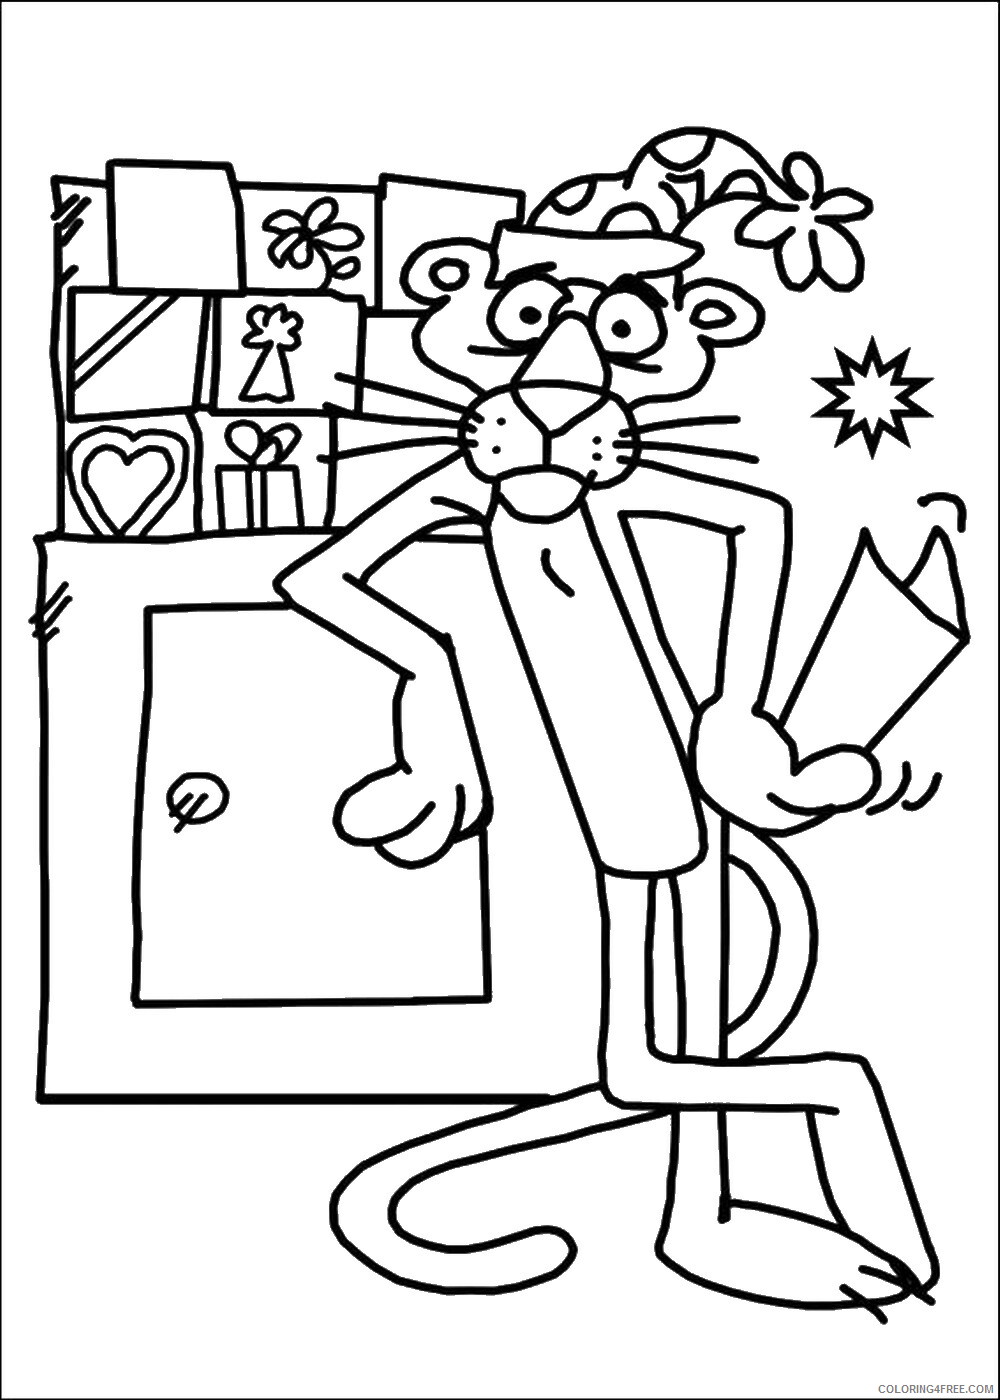 Pink Panther Coloring Pages TV Film pink_panther_cl_04 Printable 2020 06258 Coloring4free